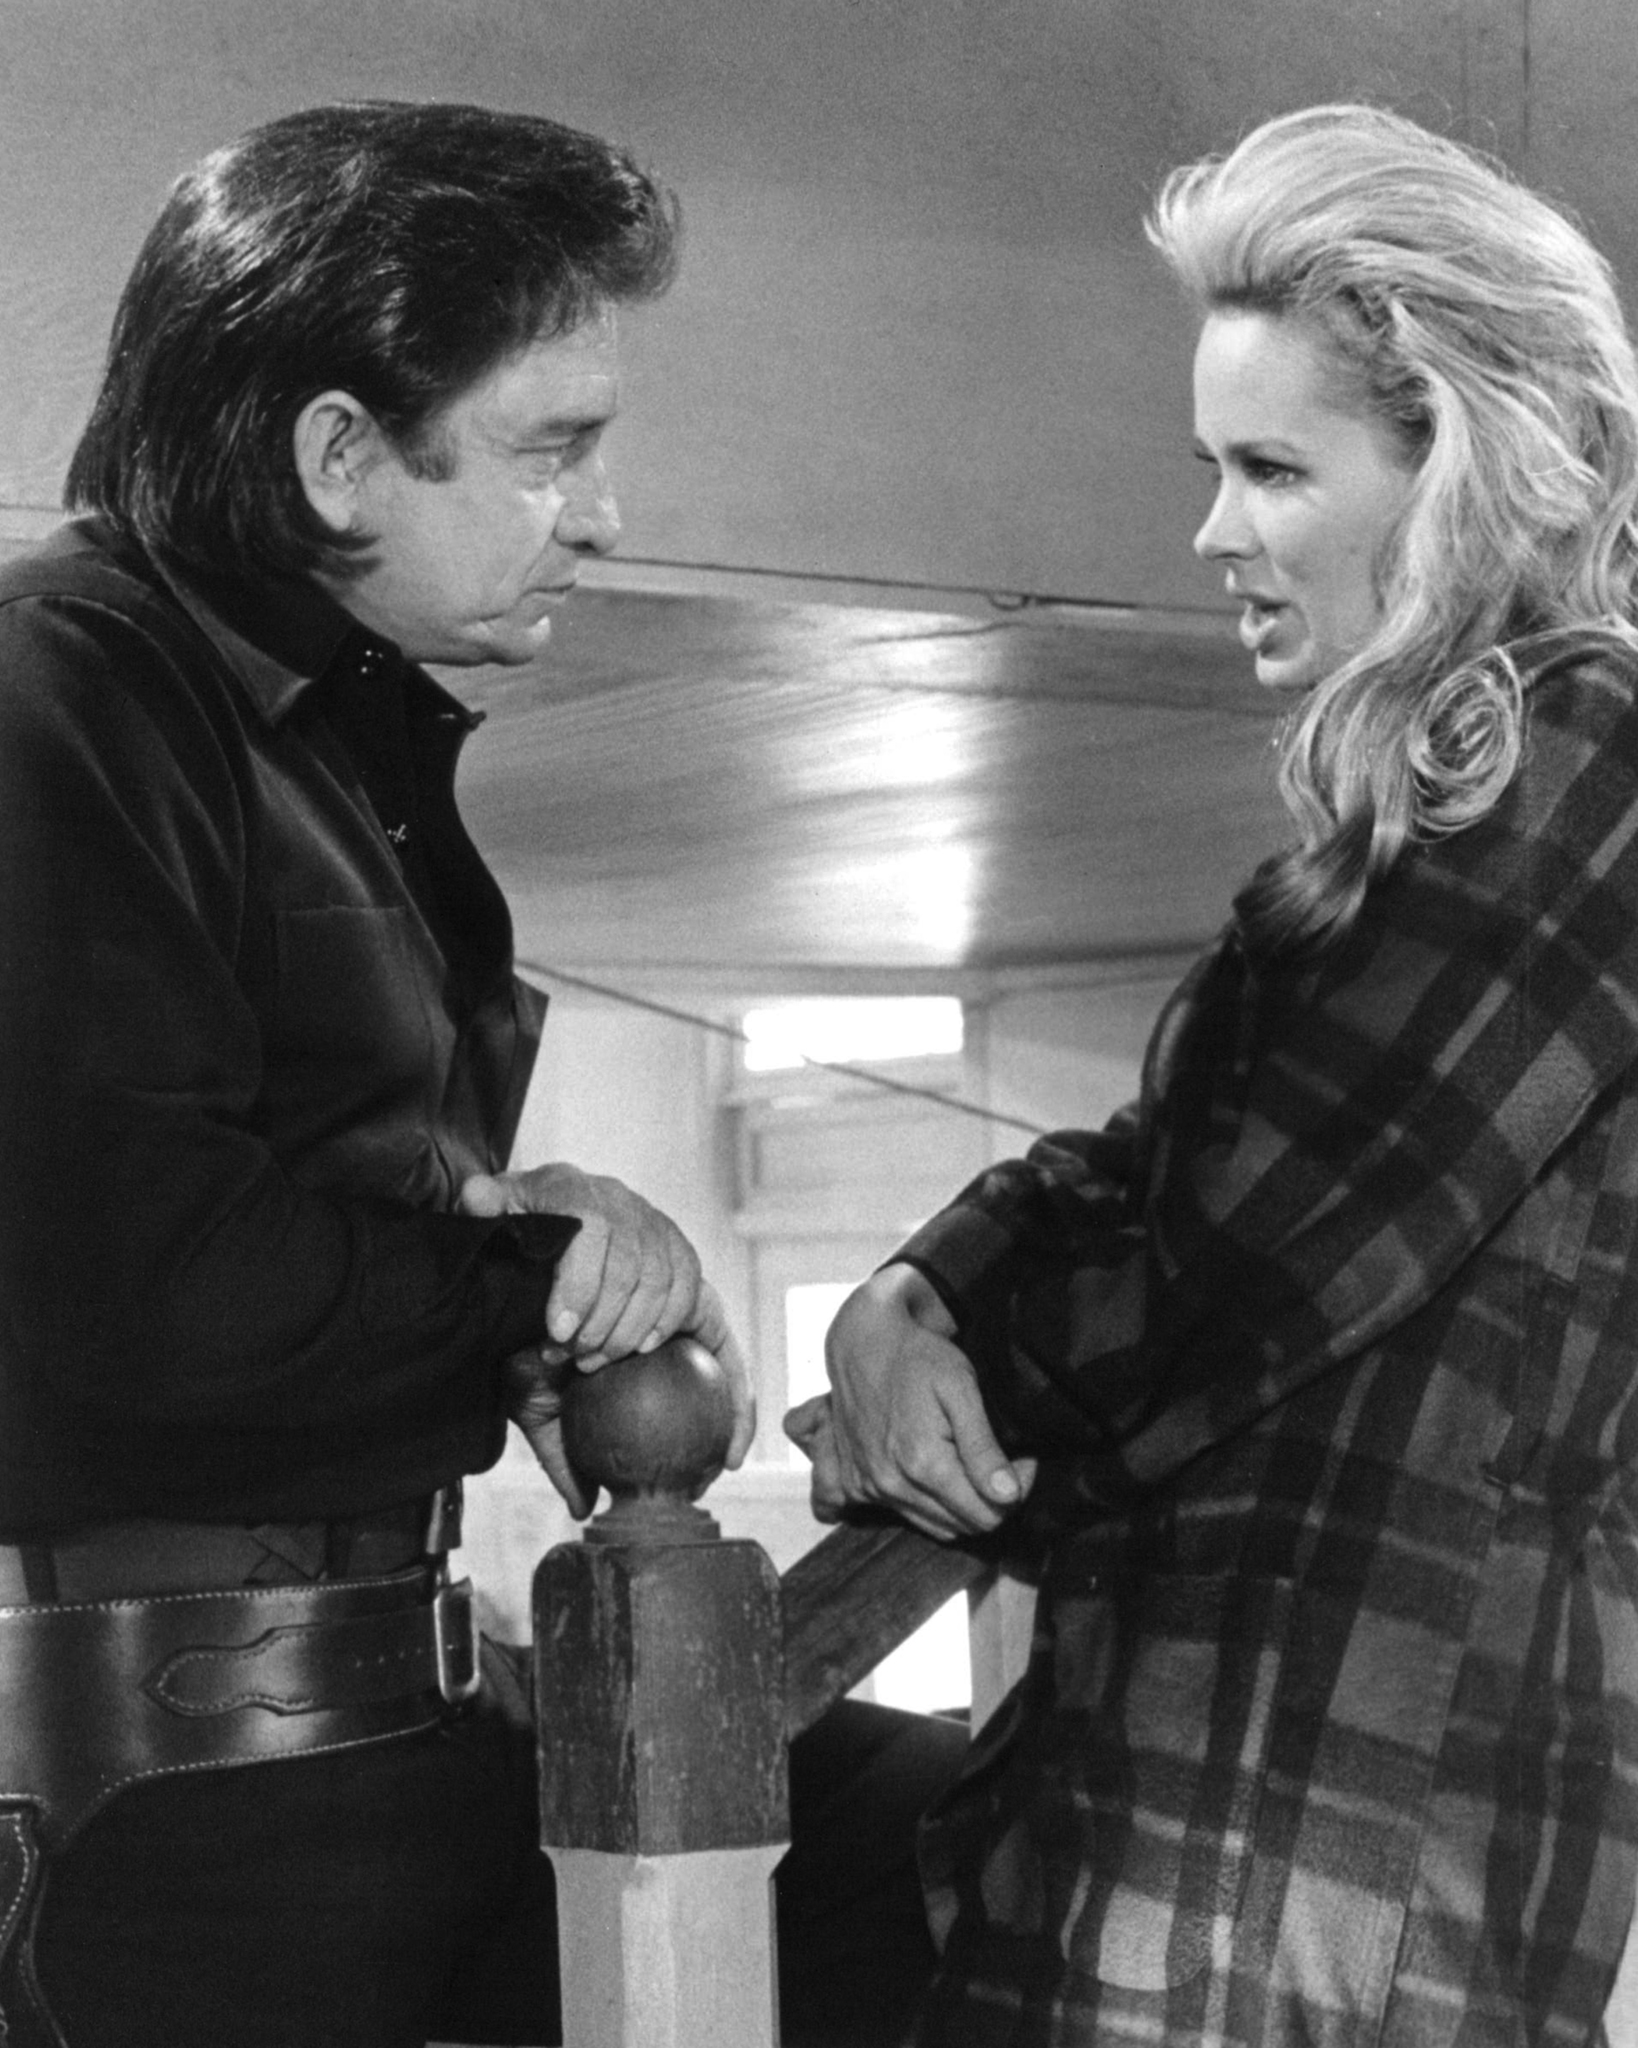 Karen Black and Johnny Cash at an event for A Gunfight (1971)